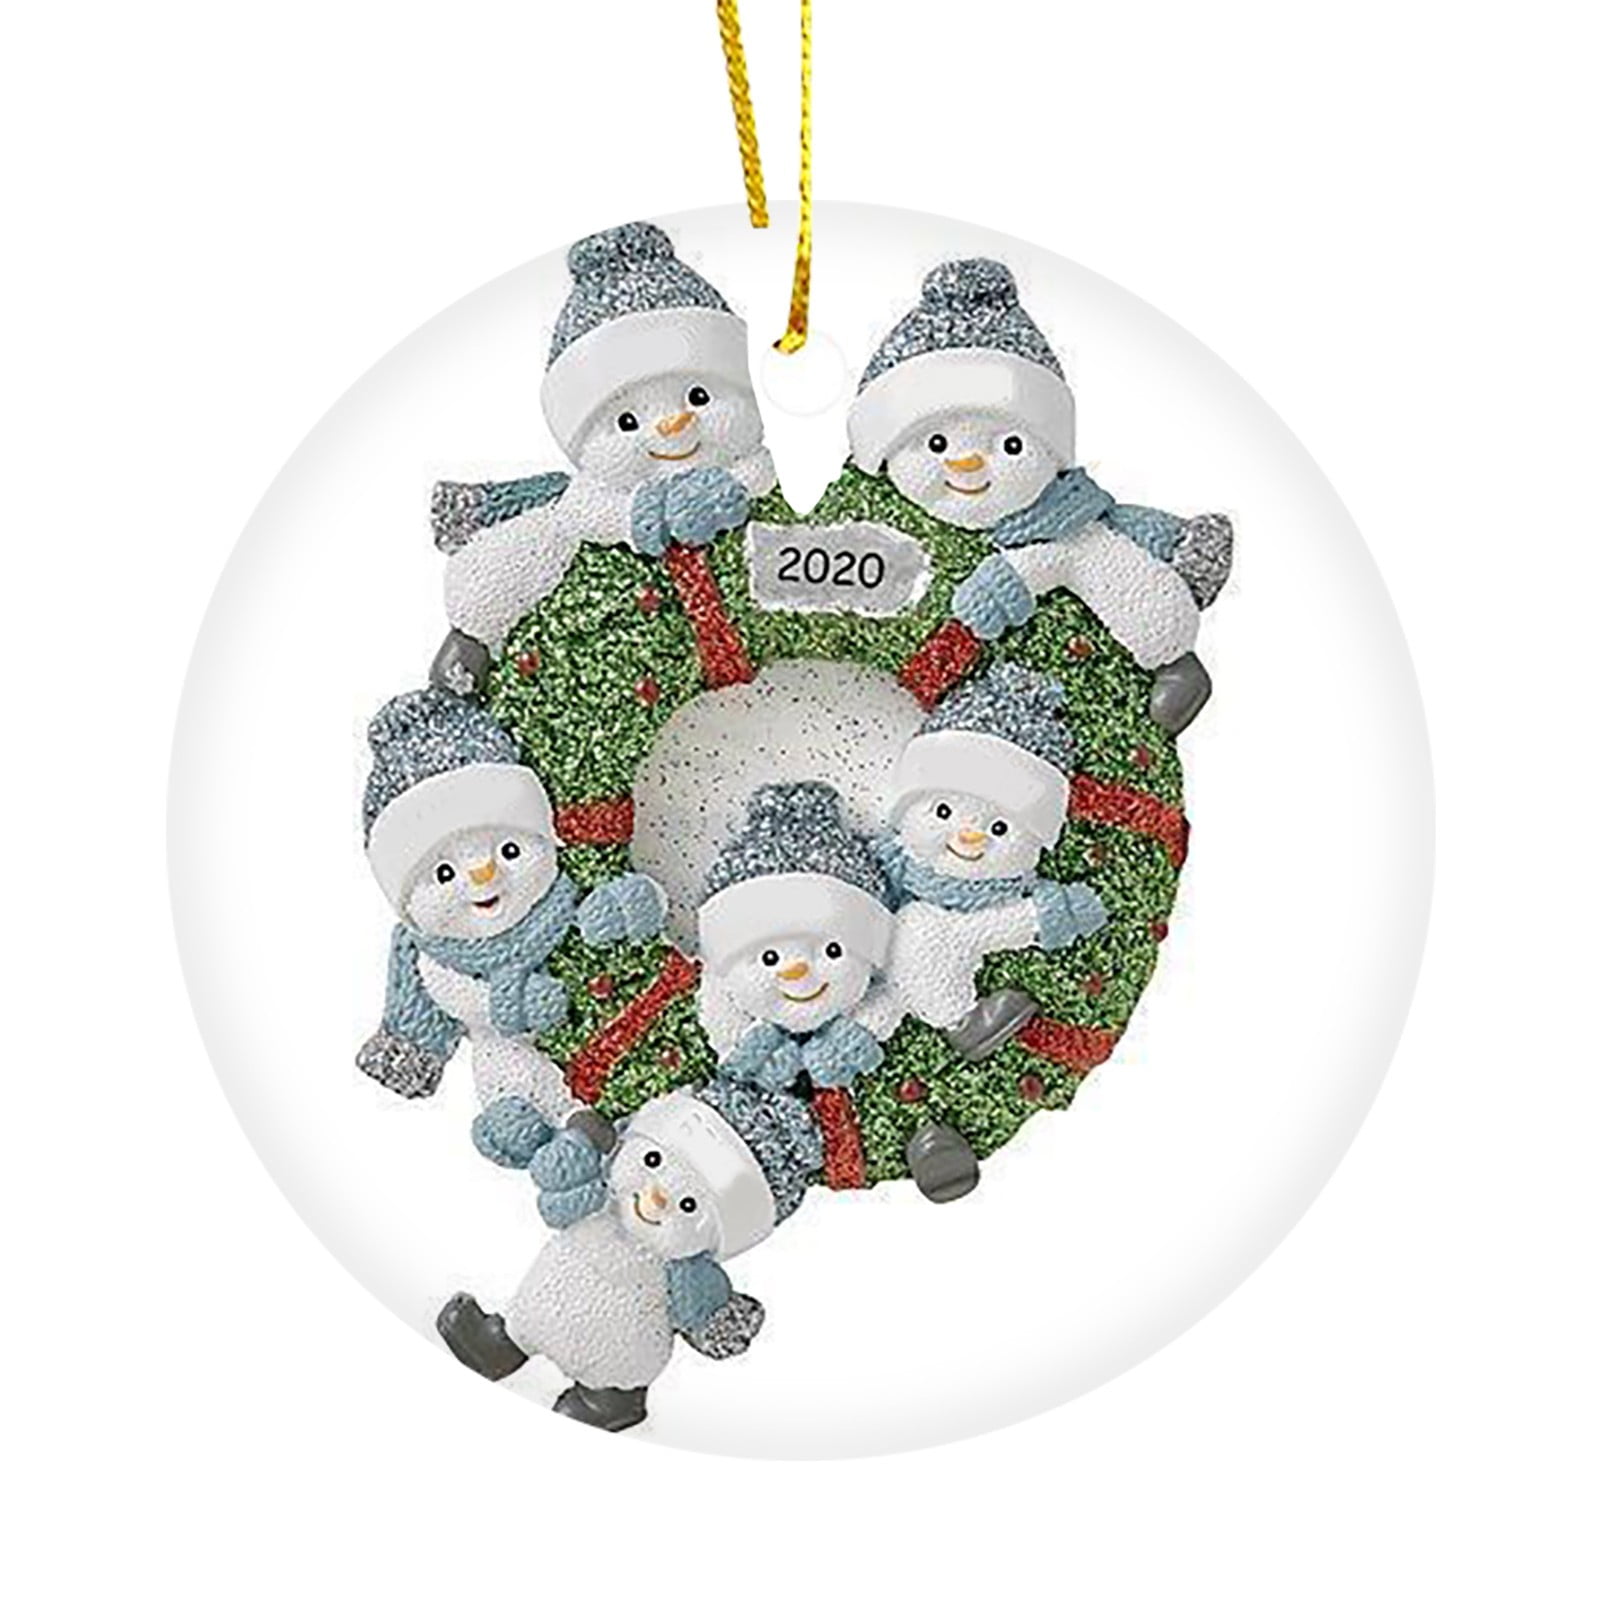 Details about   Elephant Lover's Christmas Ornament 